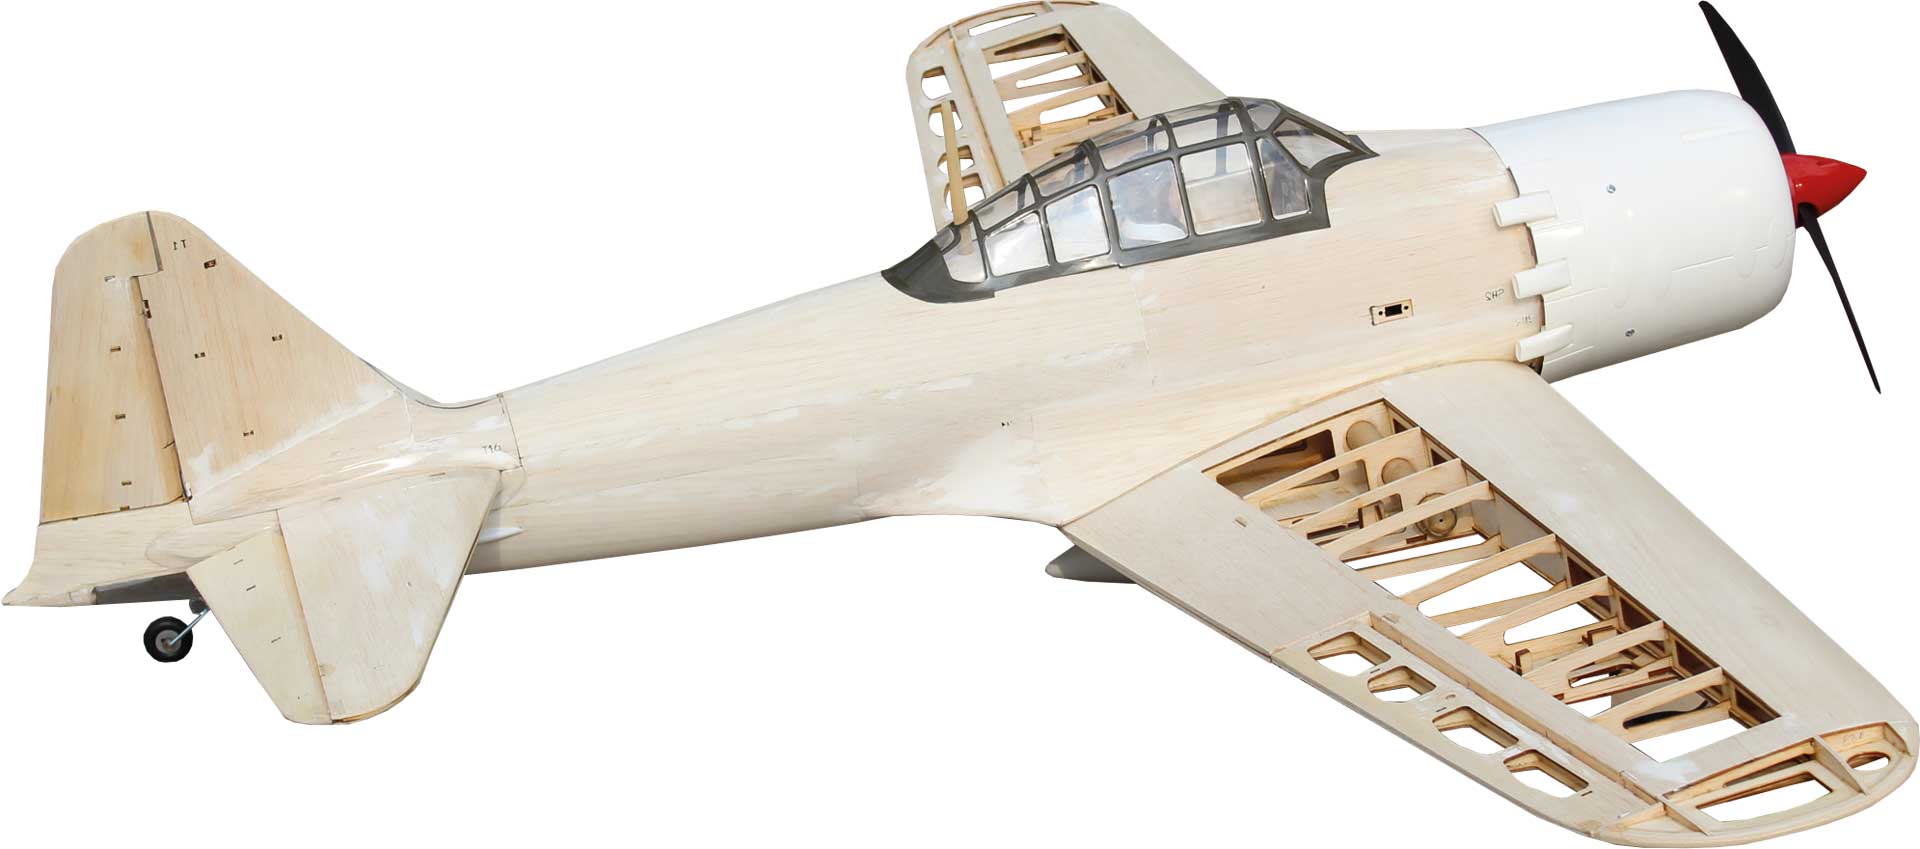 Seagull Models ( SG-Models ) A6M2 ZERO 67"MASTER SCALE KIT EDITION WOODEN CONSTRUCTION KIT